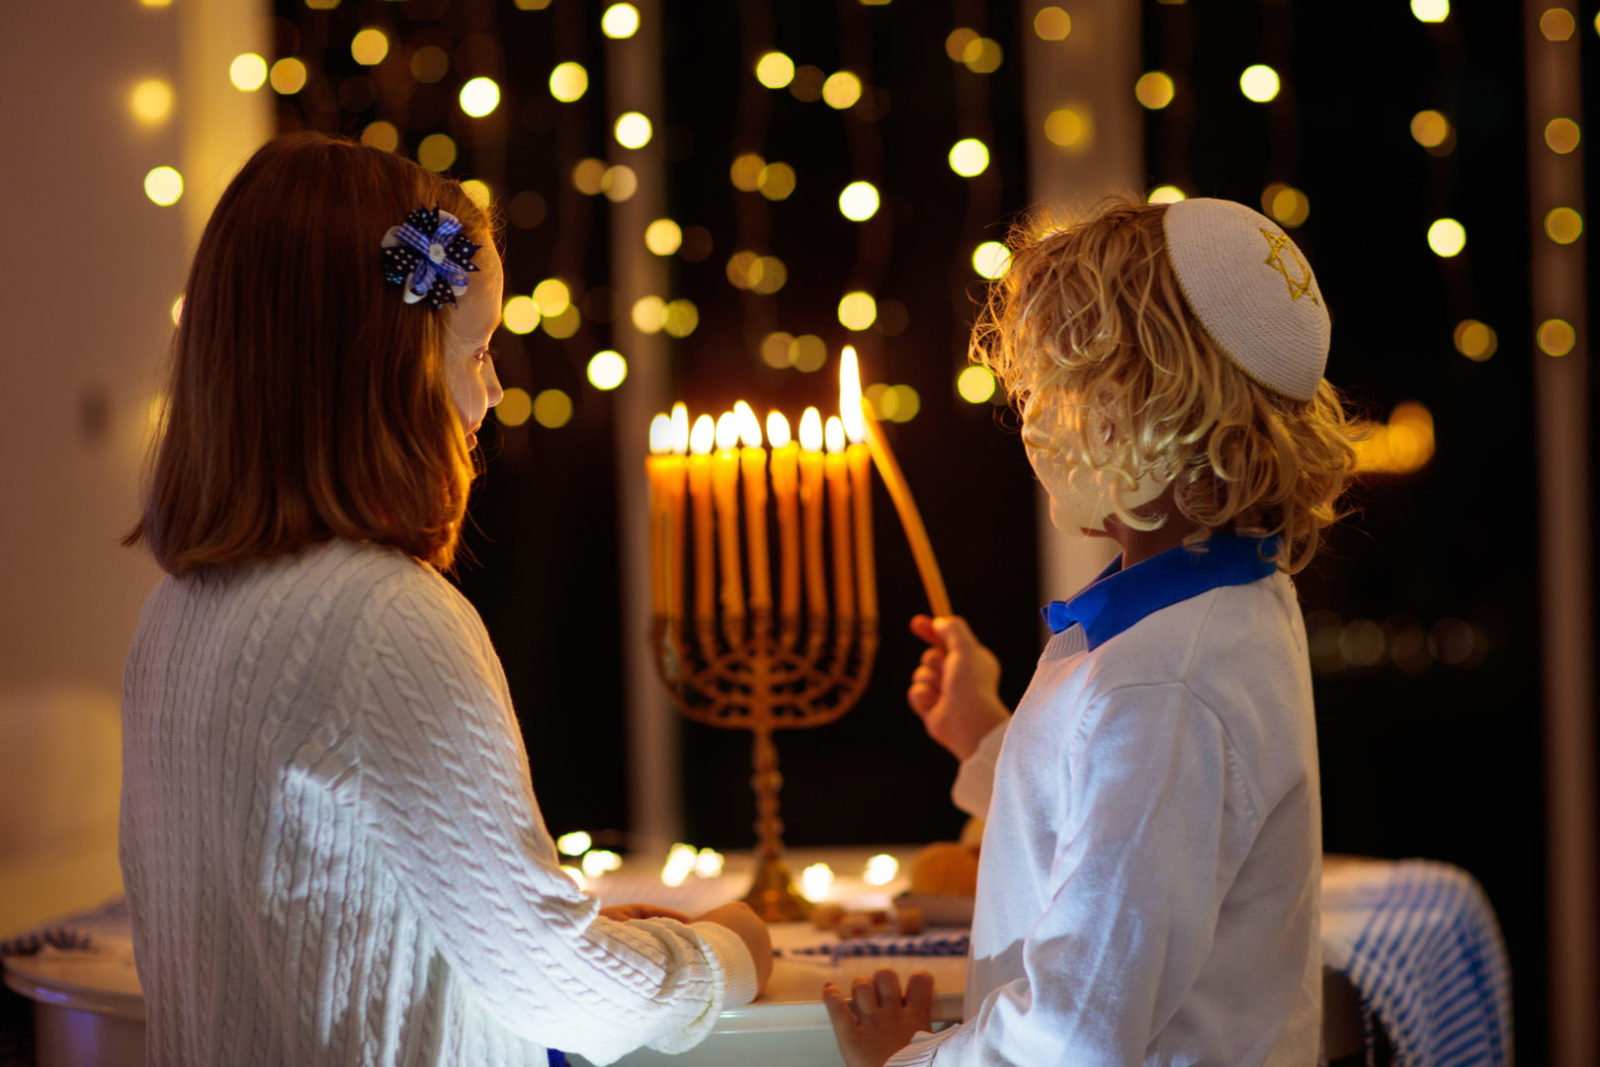 Happy Hanukkah 2021, Images, Wallpaper and wishes